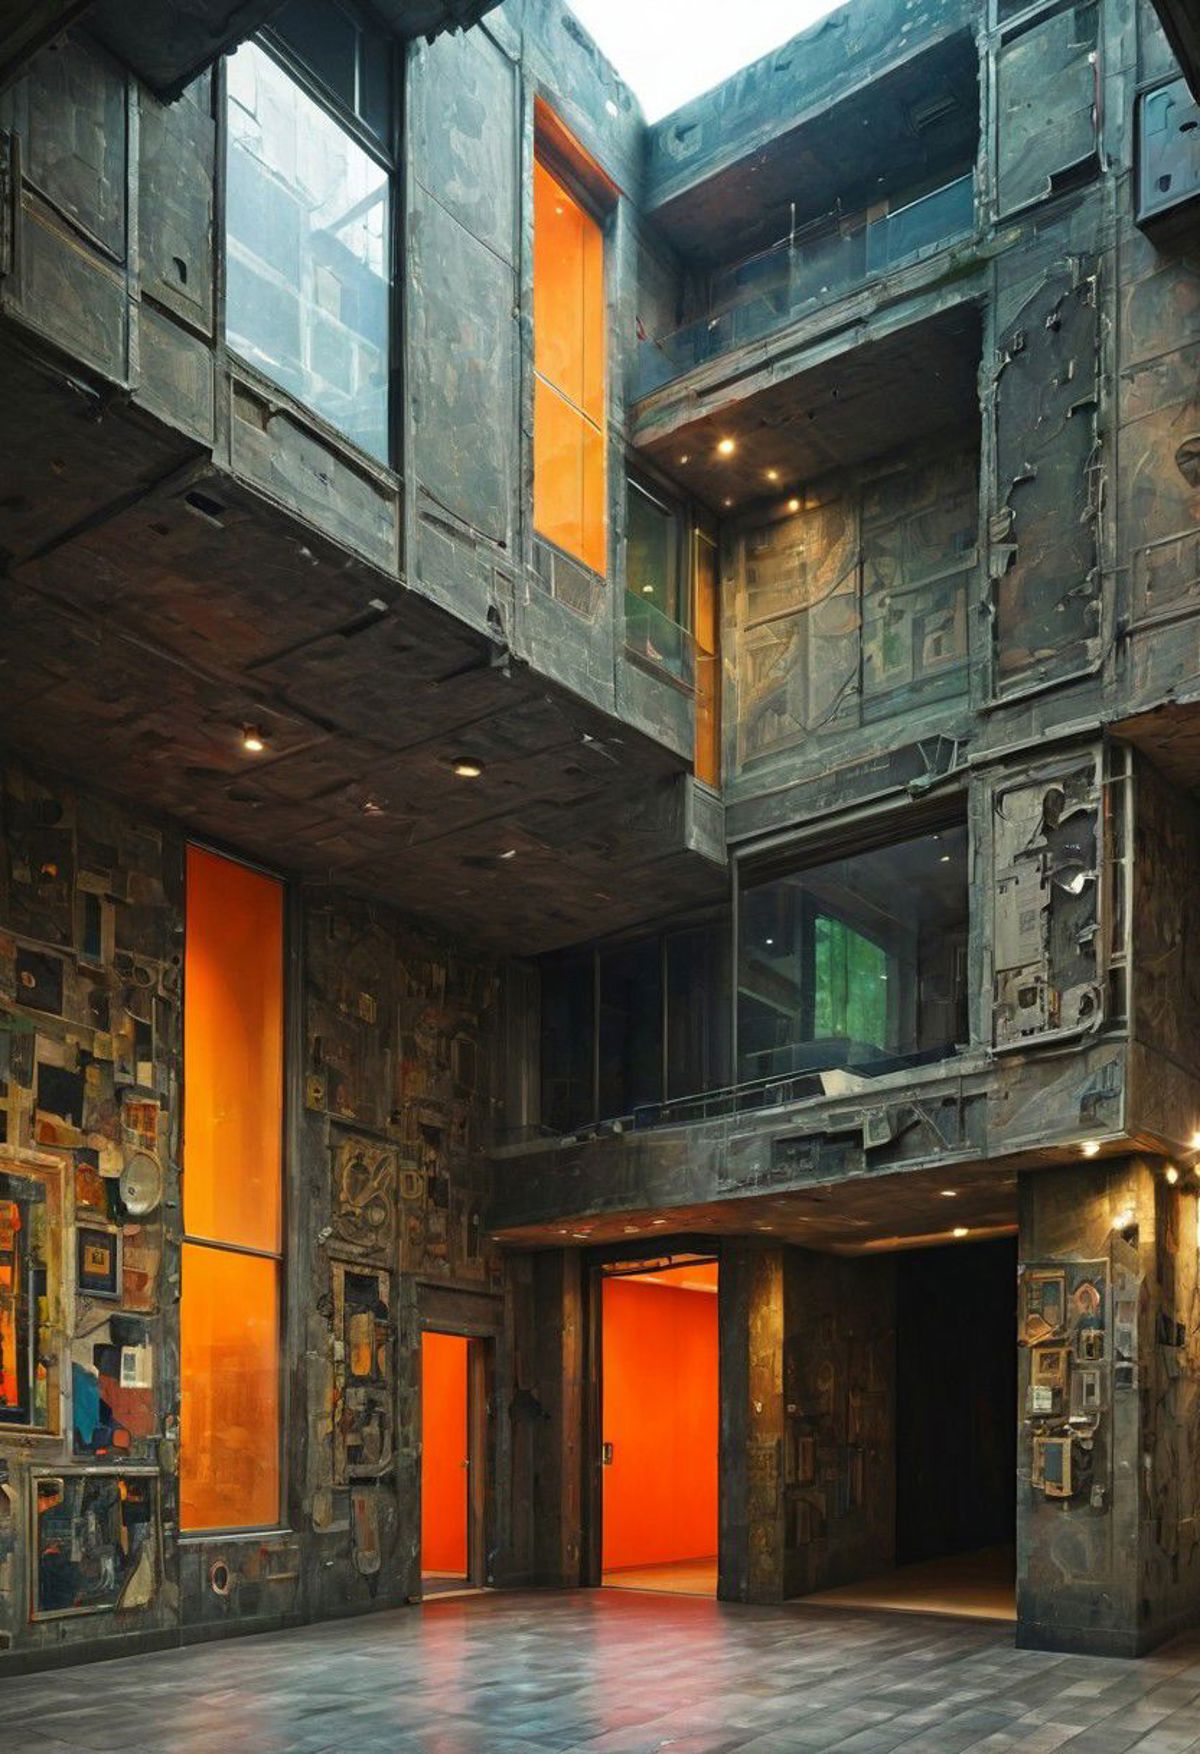 A view of a rustic building with orange doors and walls, and a glass staircase.